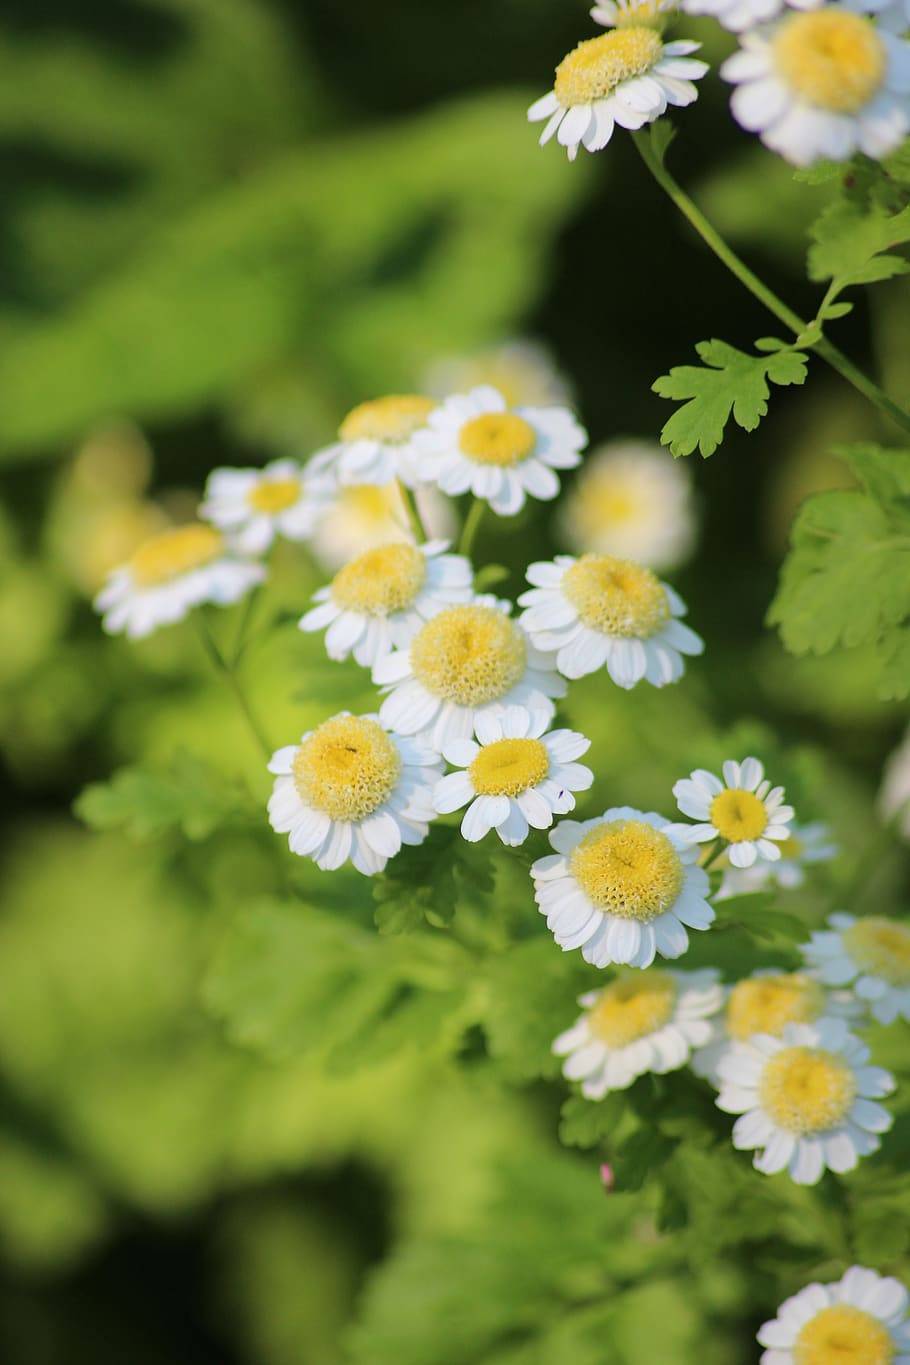 white flowers with yellow center, lime leaves and stems